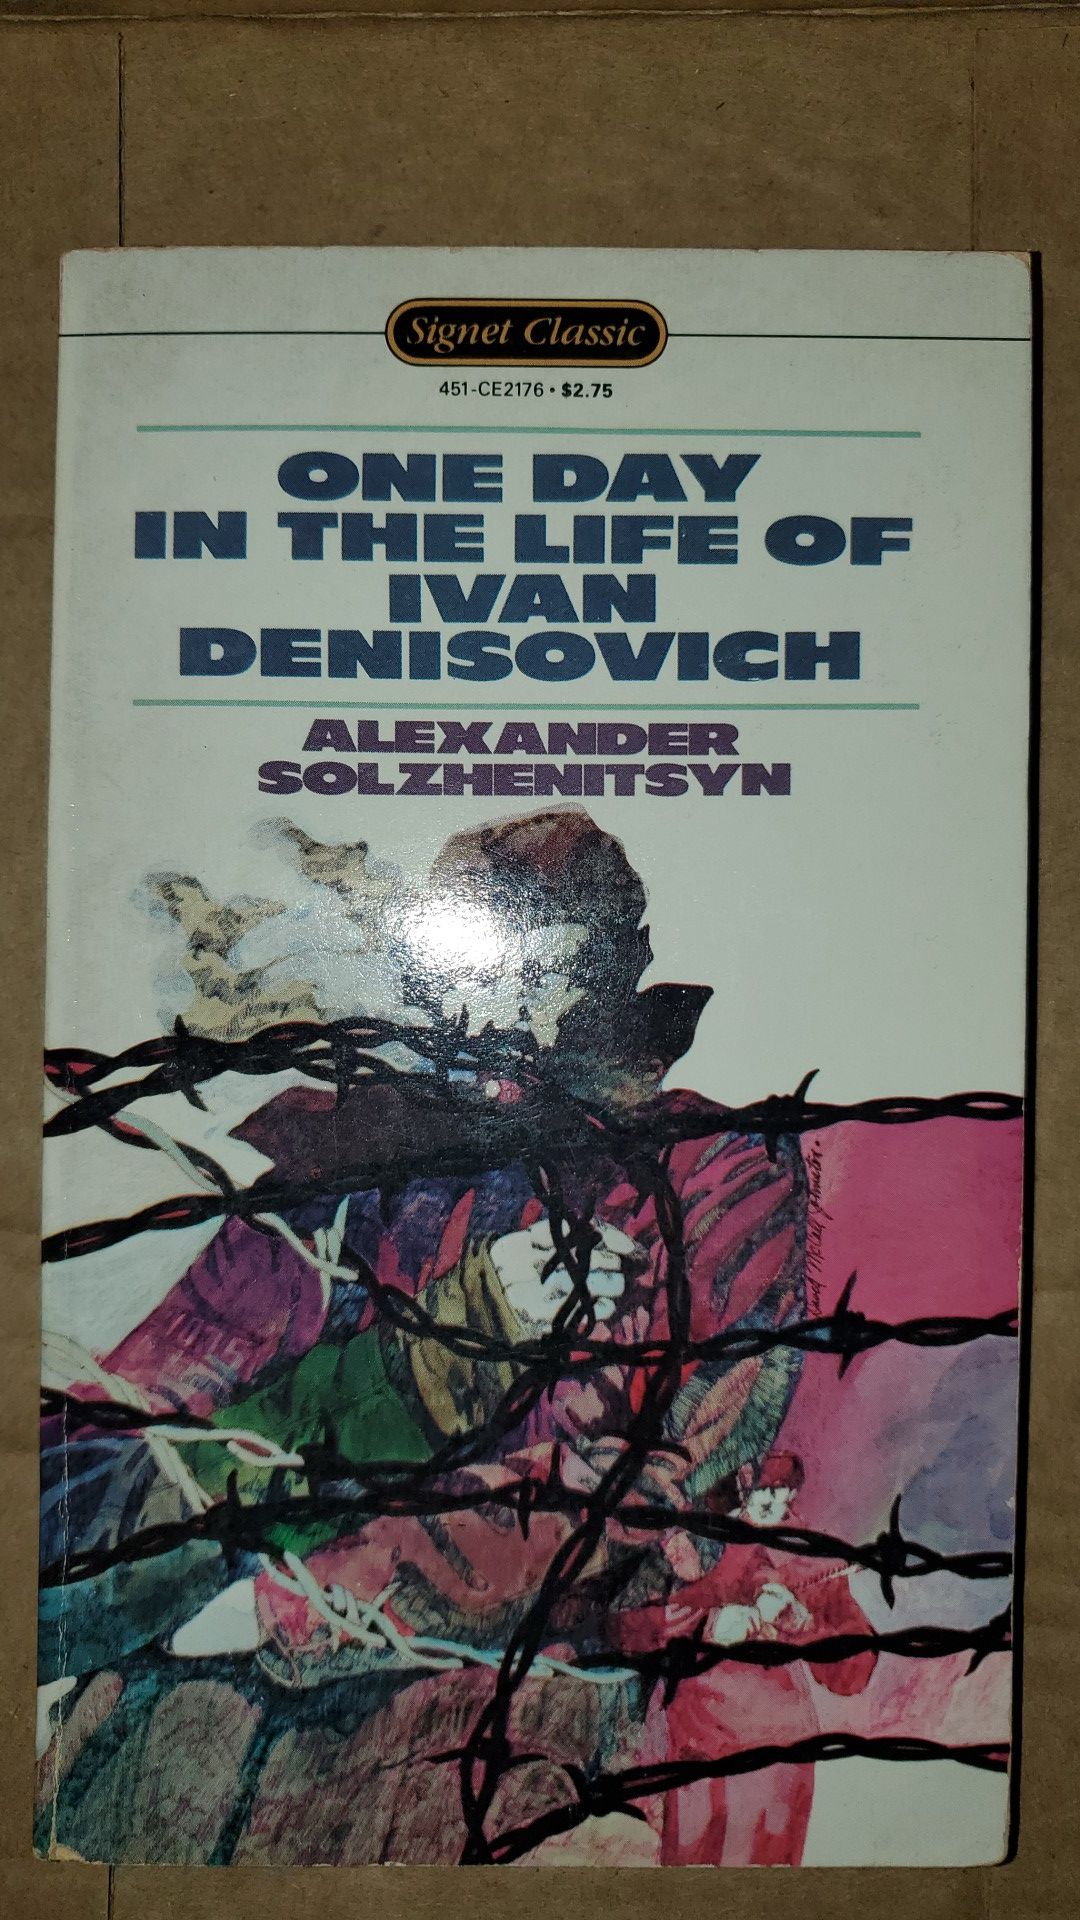 One Day in the life of Ivan Denisovich